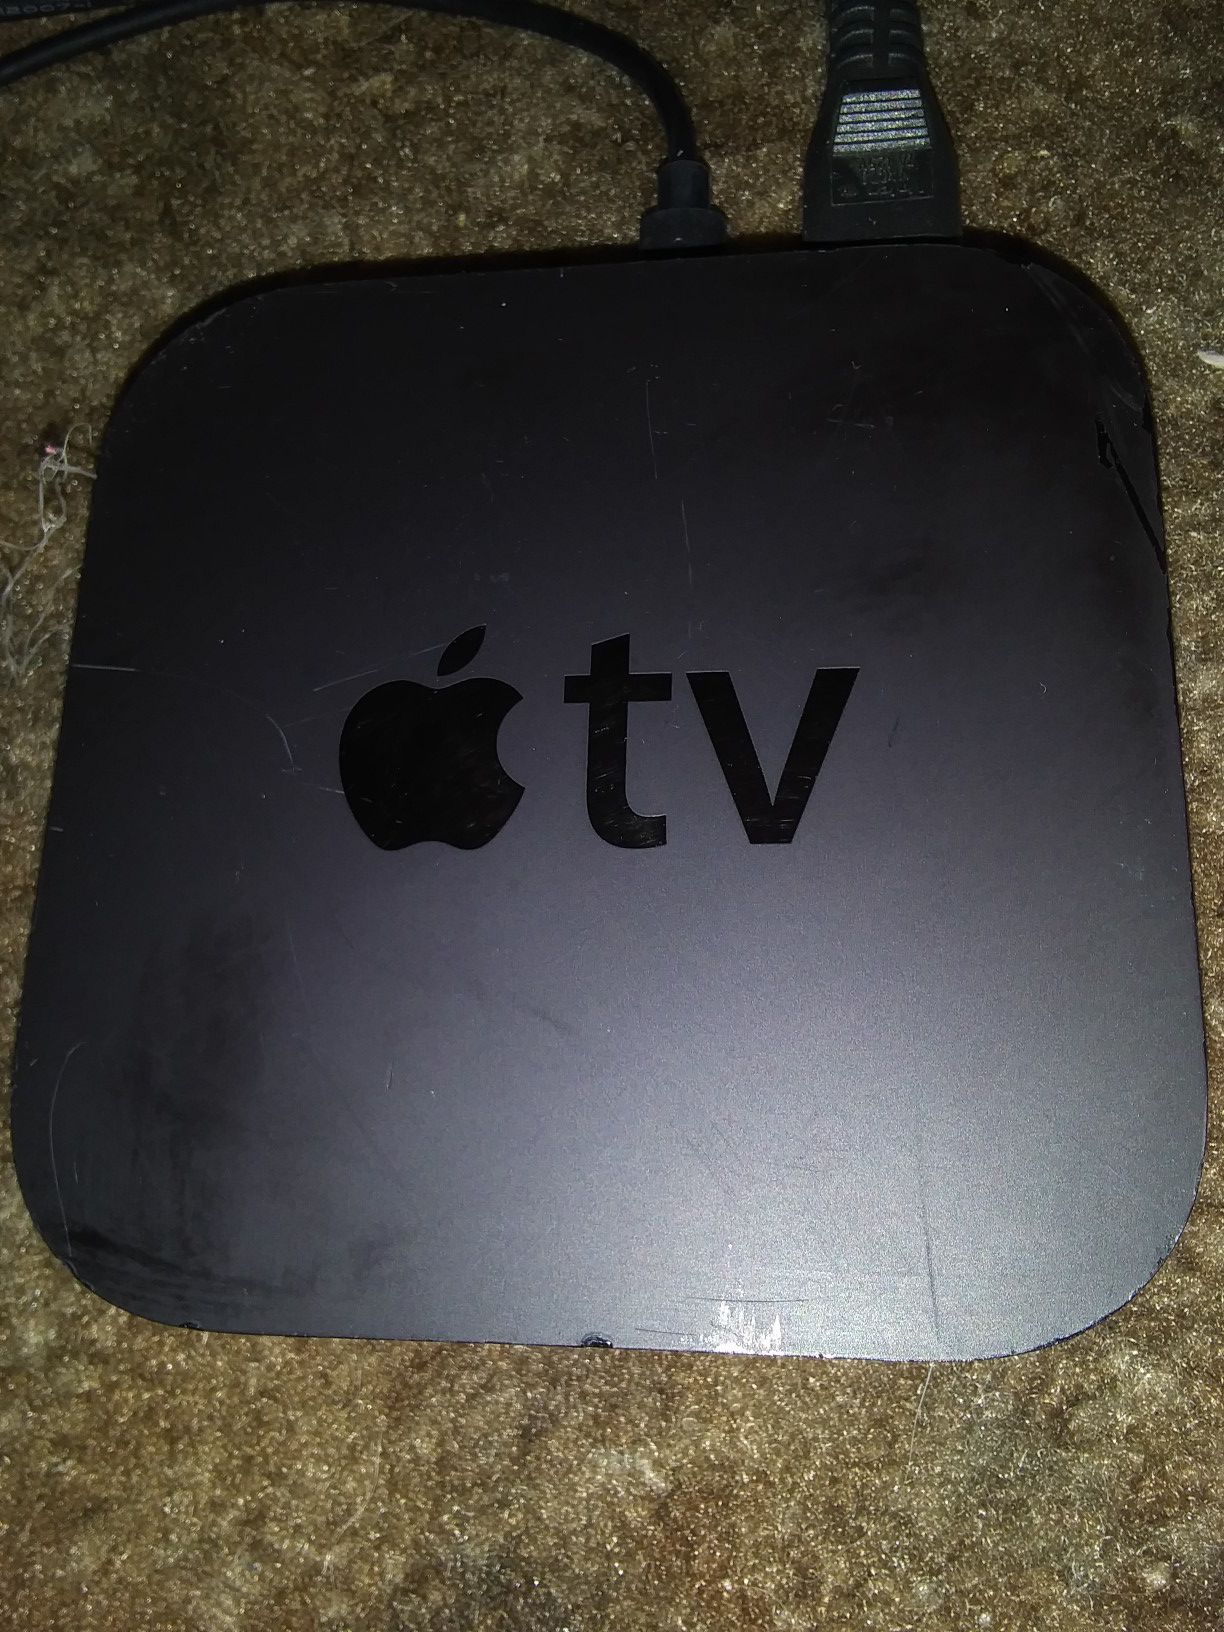 APPLE TV (3RD GENERATION) WORKS GREAT! INCLUDES HDMI CABLE- NEEDS UNIVERSAL REMOTE-